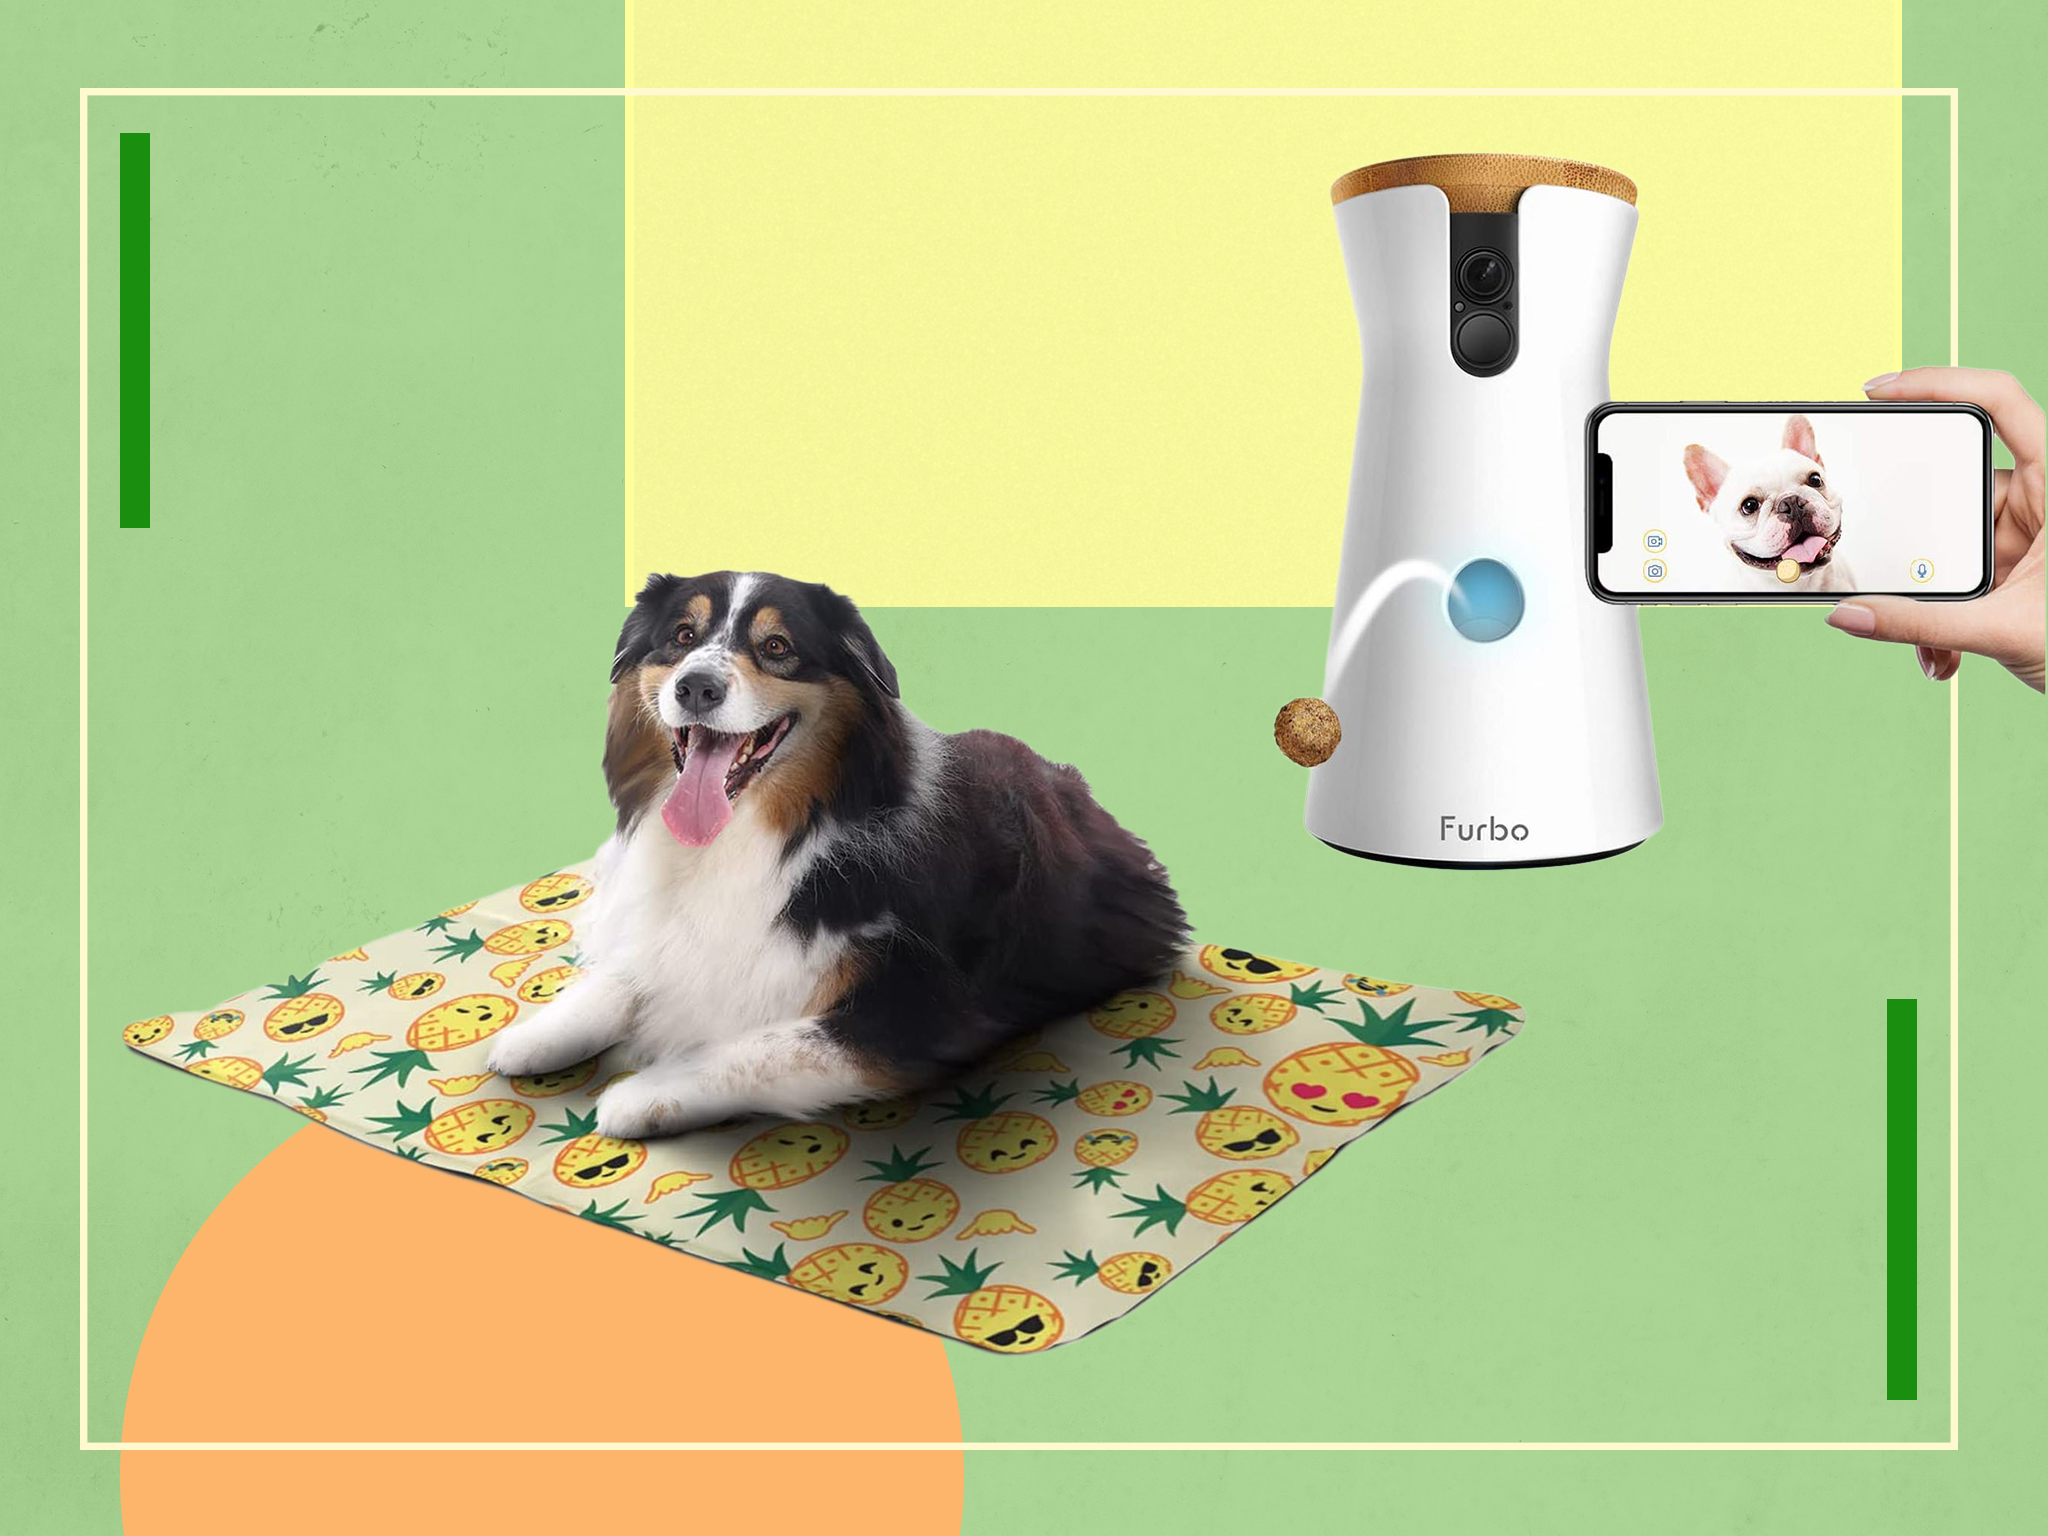 We’ve got our eye on everything from toys and games, to plush dog beds and the hottest gadgets